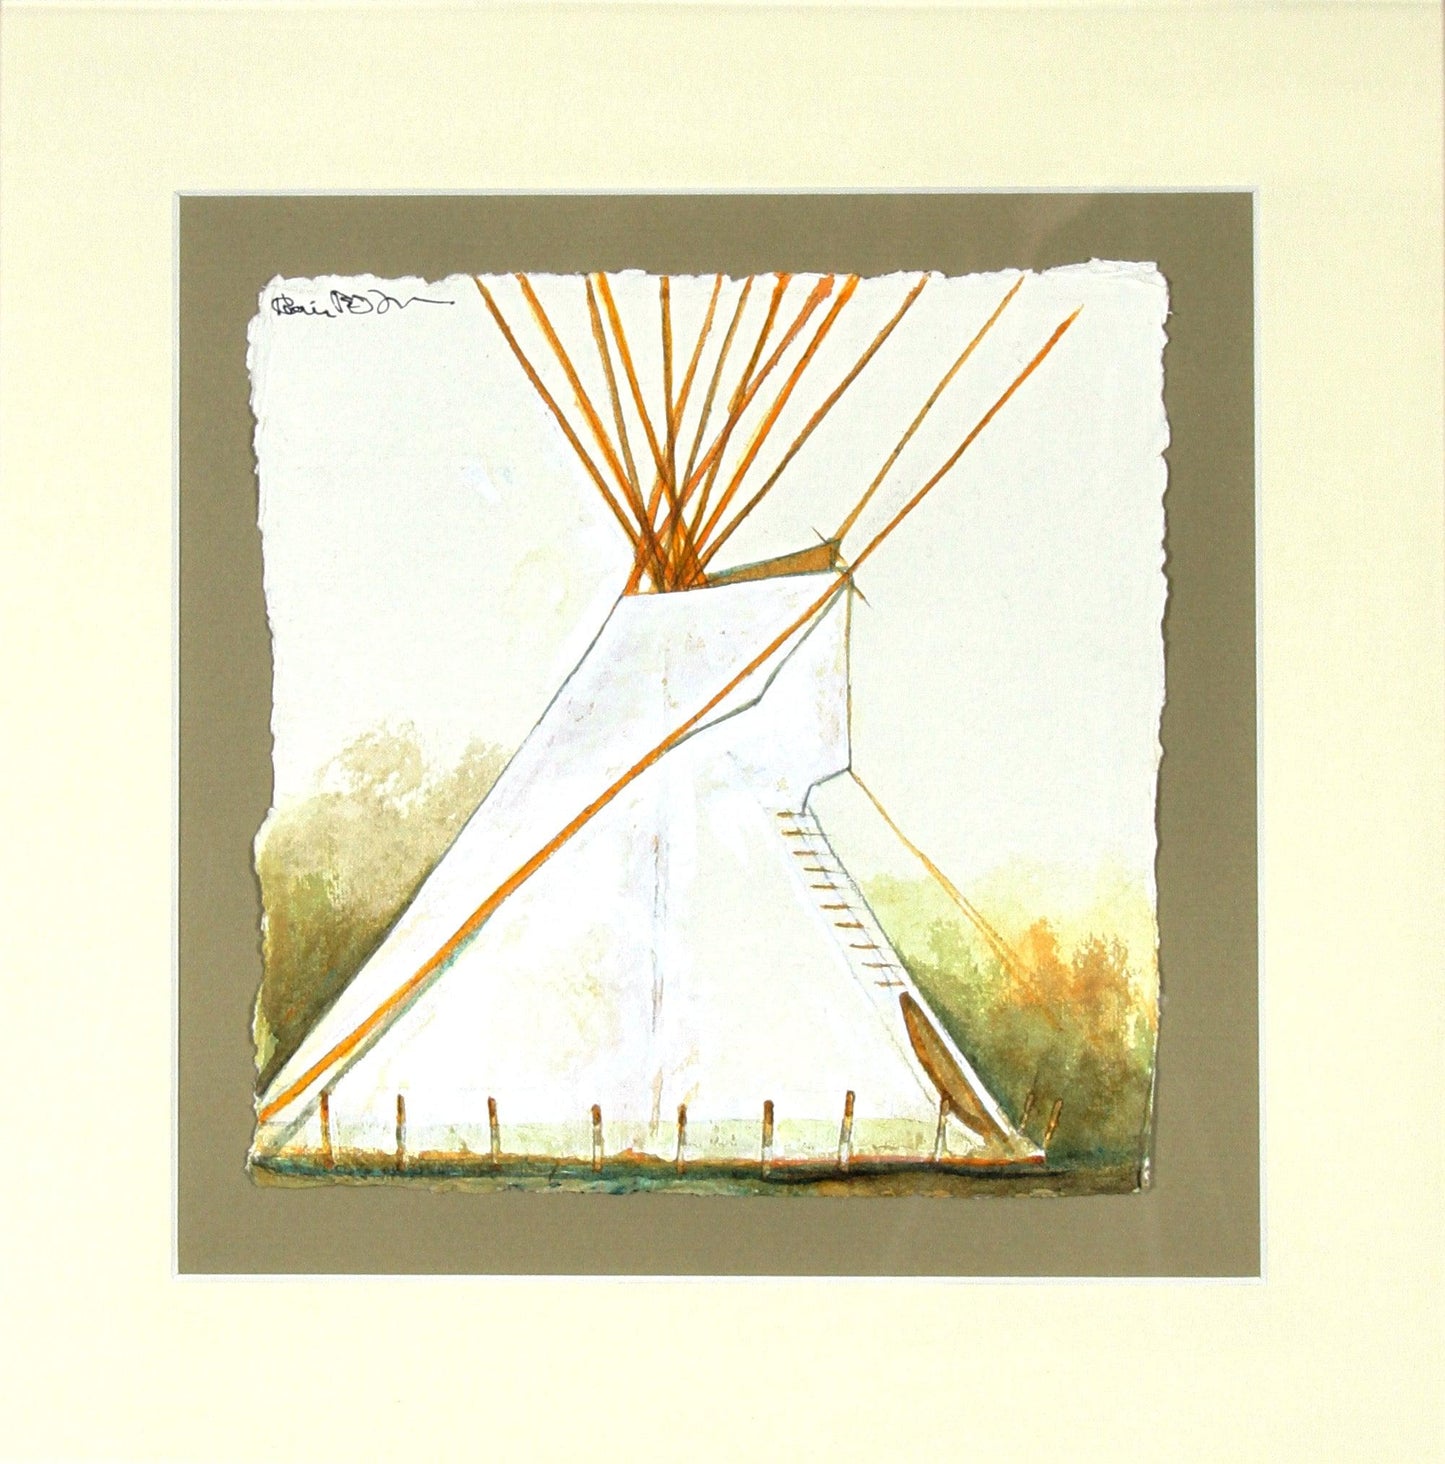 Crow Tipi at the Little Big Horn River-Mixed-Media Original-Kevin Red Star-Sorrel Sky Gallery